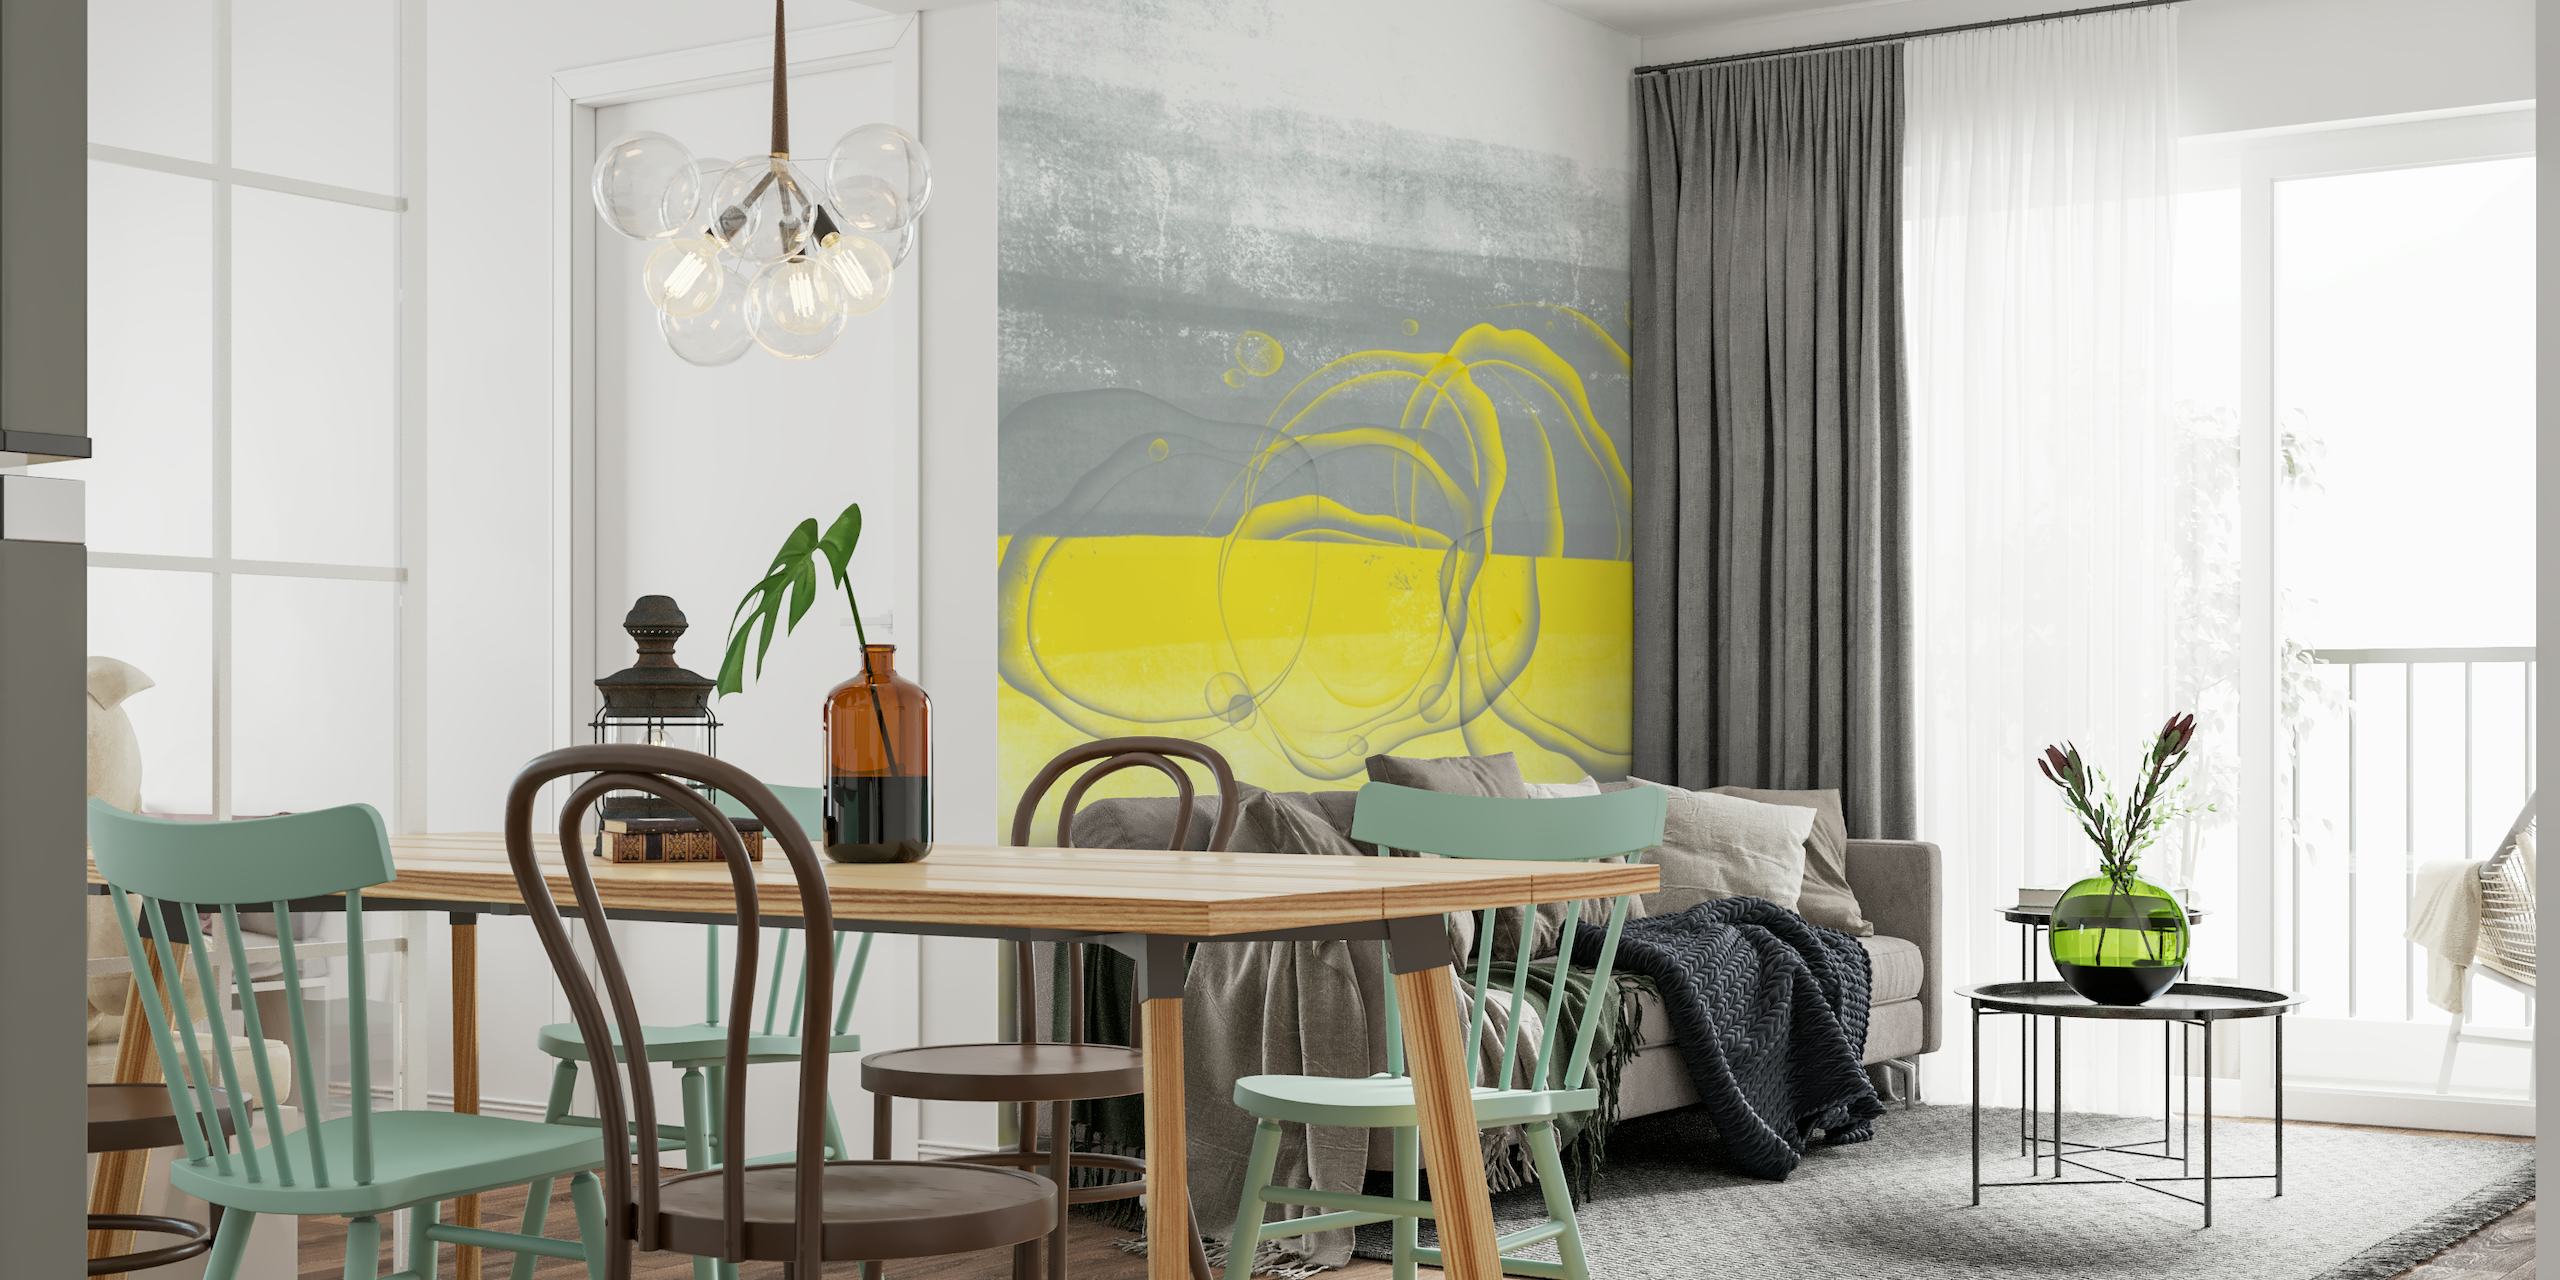 Abstract yellow and grey wall mural with a modern artistic design